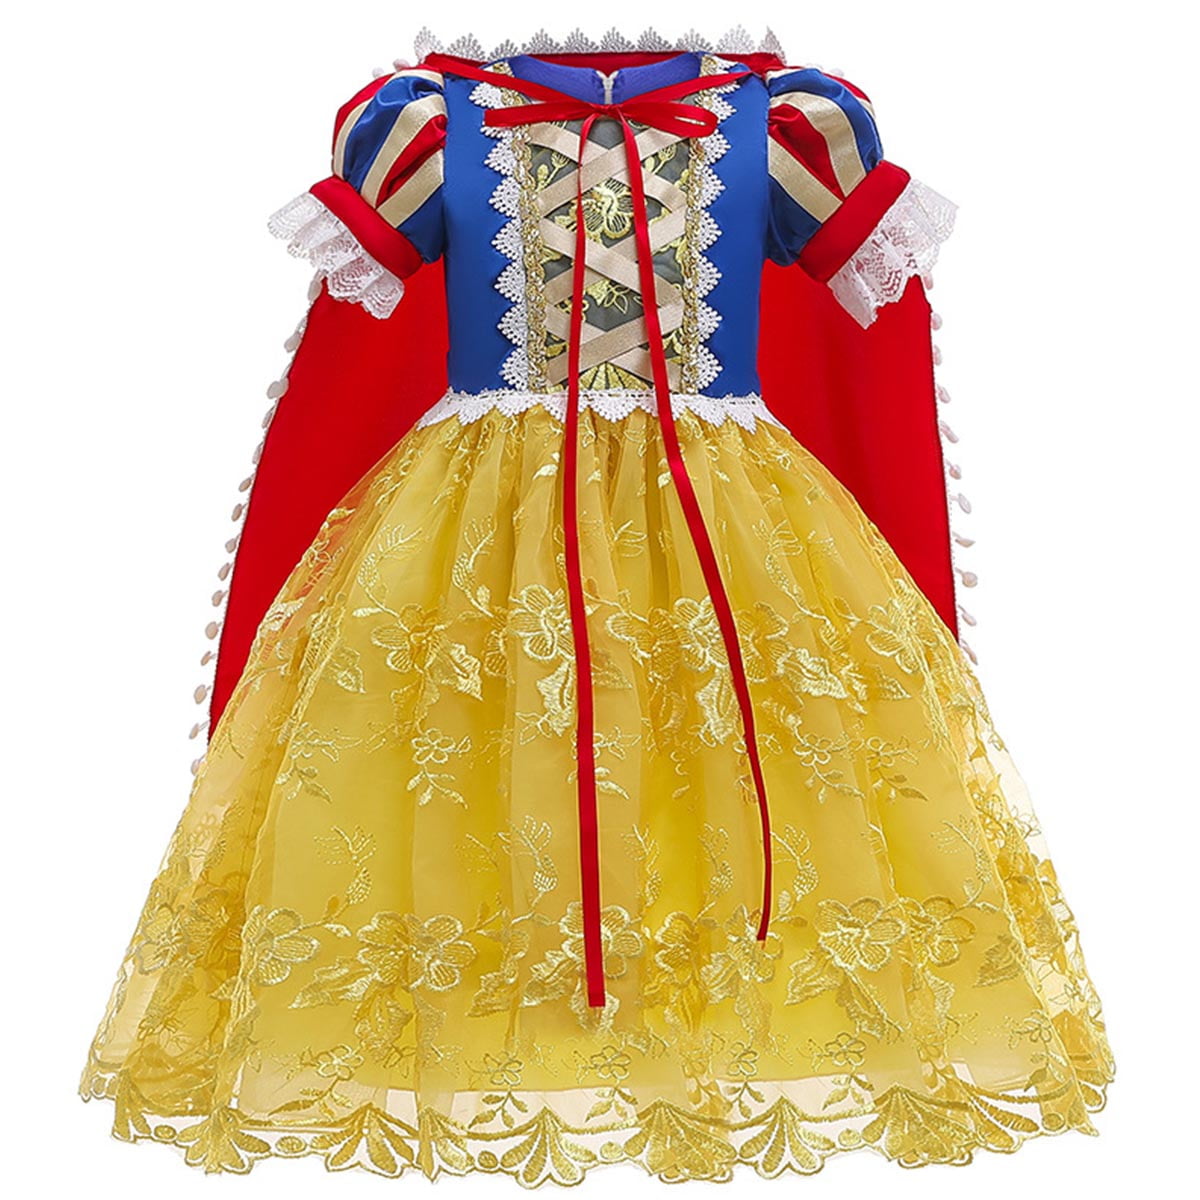 Child Disney Storytime Snow White Outfit Fancy Dress Costume Princess Classic 